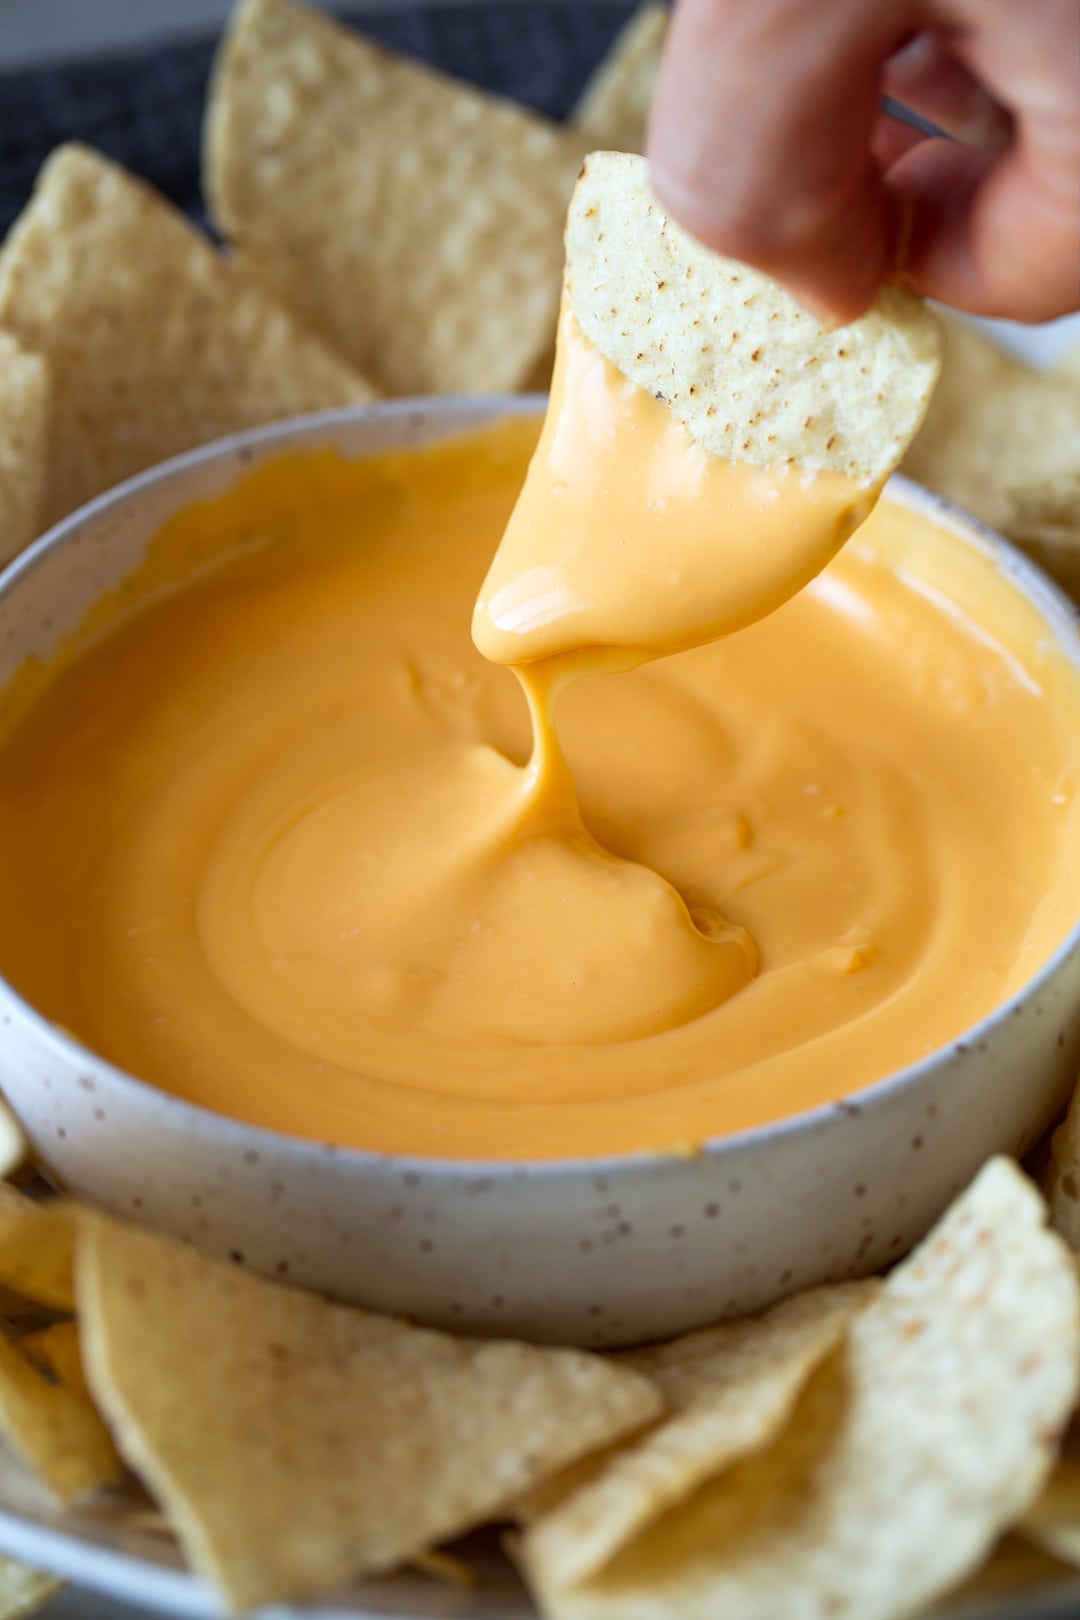 tortilla chip being dunked into a bowl of cheese dip